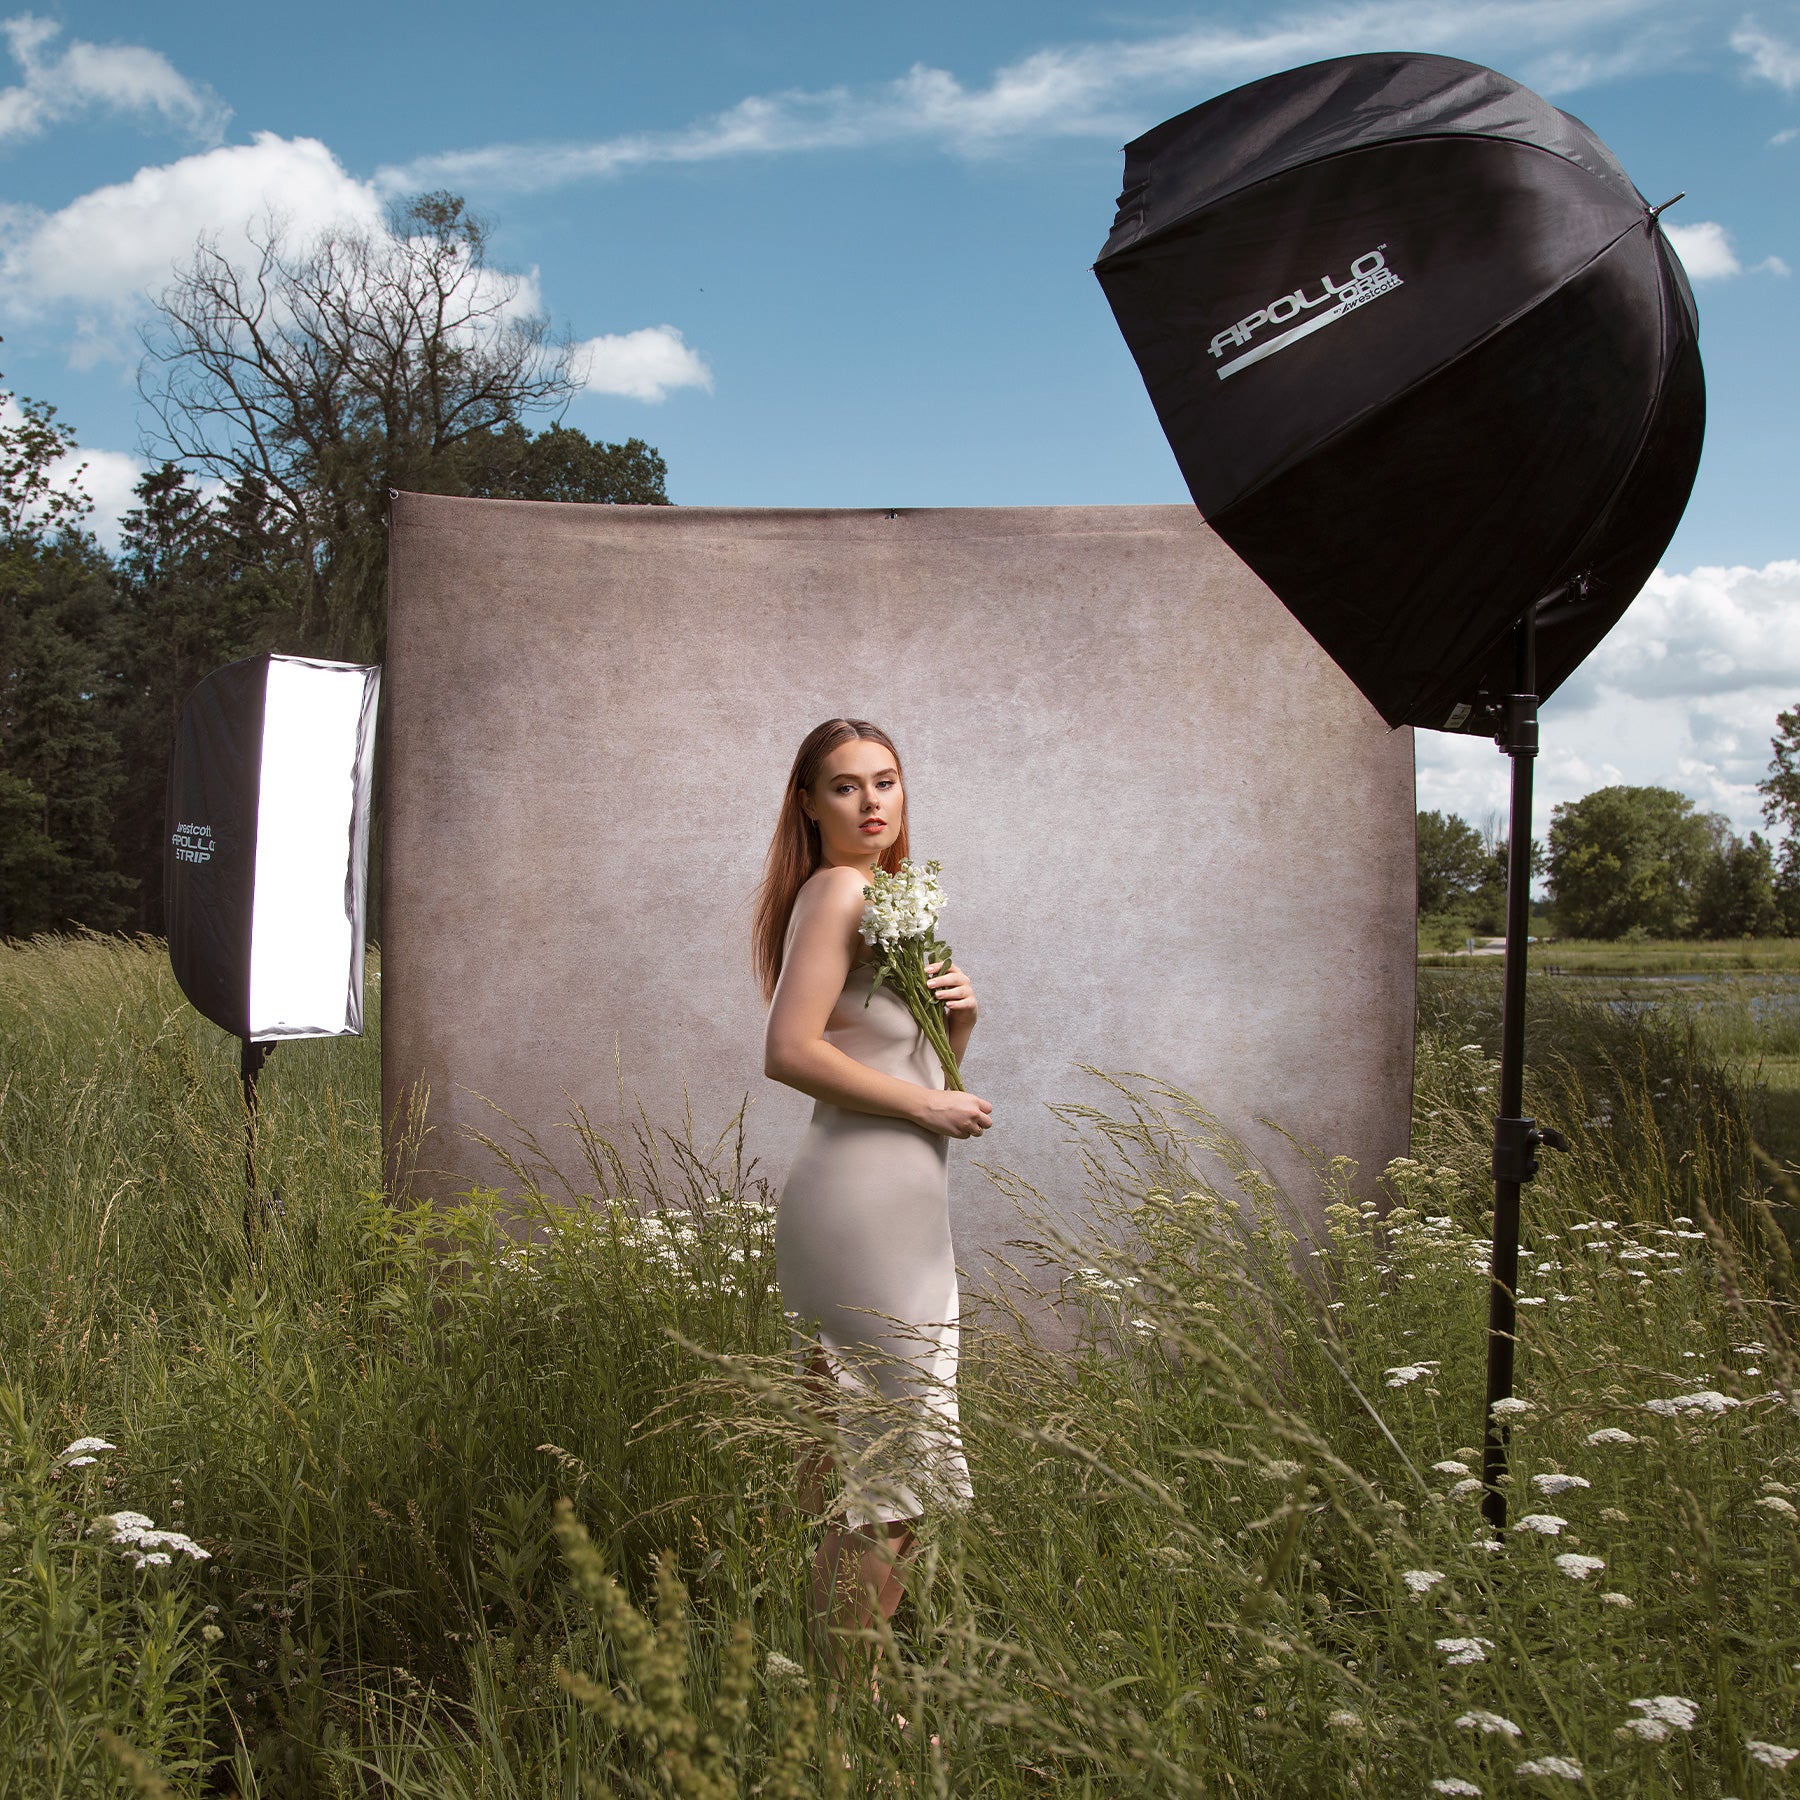 X-Drop Pro Backdrop with Printed Fabric Backdrop Being Used For Outdoor Travel Portrait